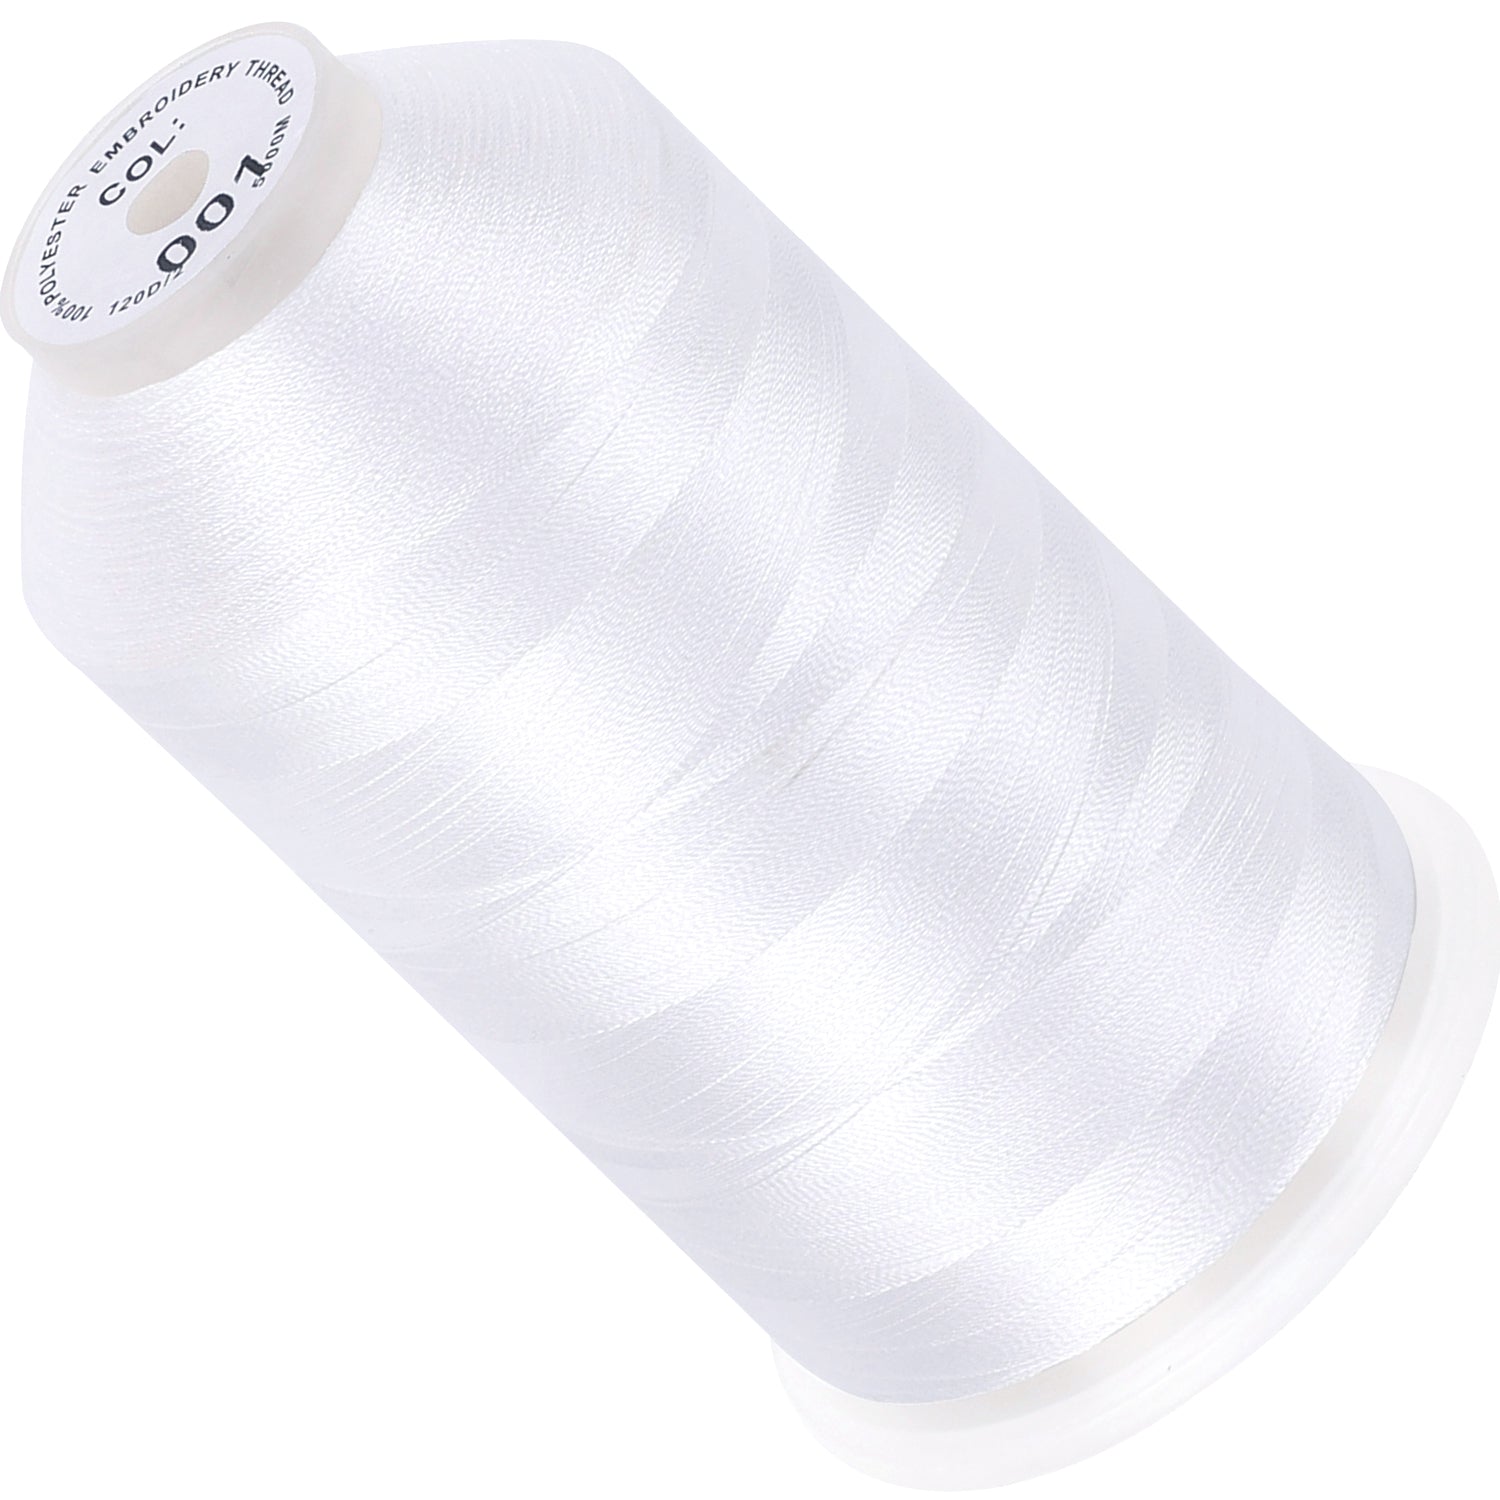 Machine Embroidery Thread - 220 Colors - Antique White - 1000